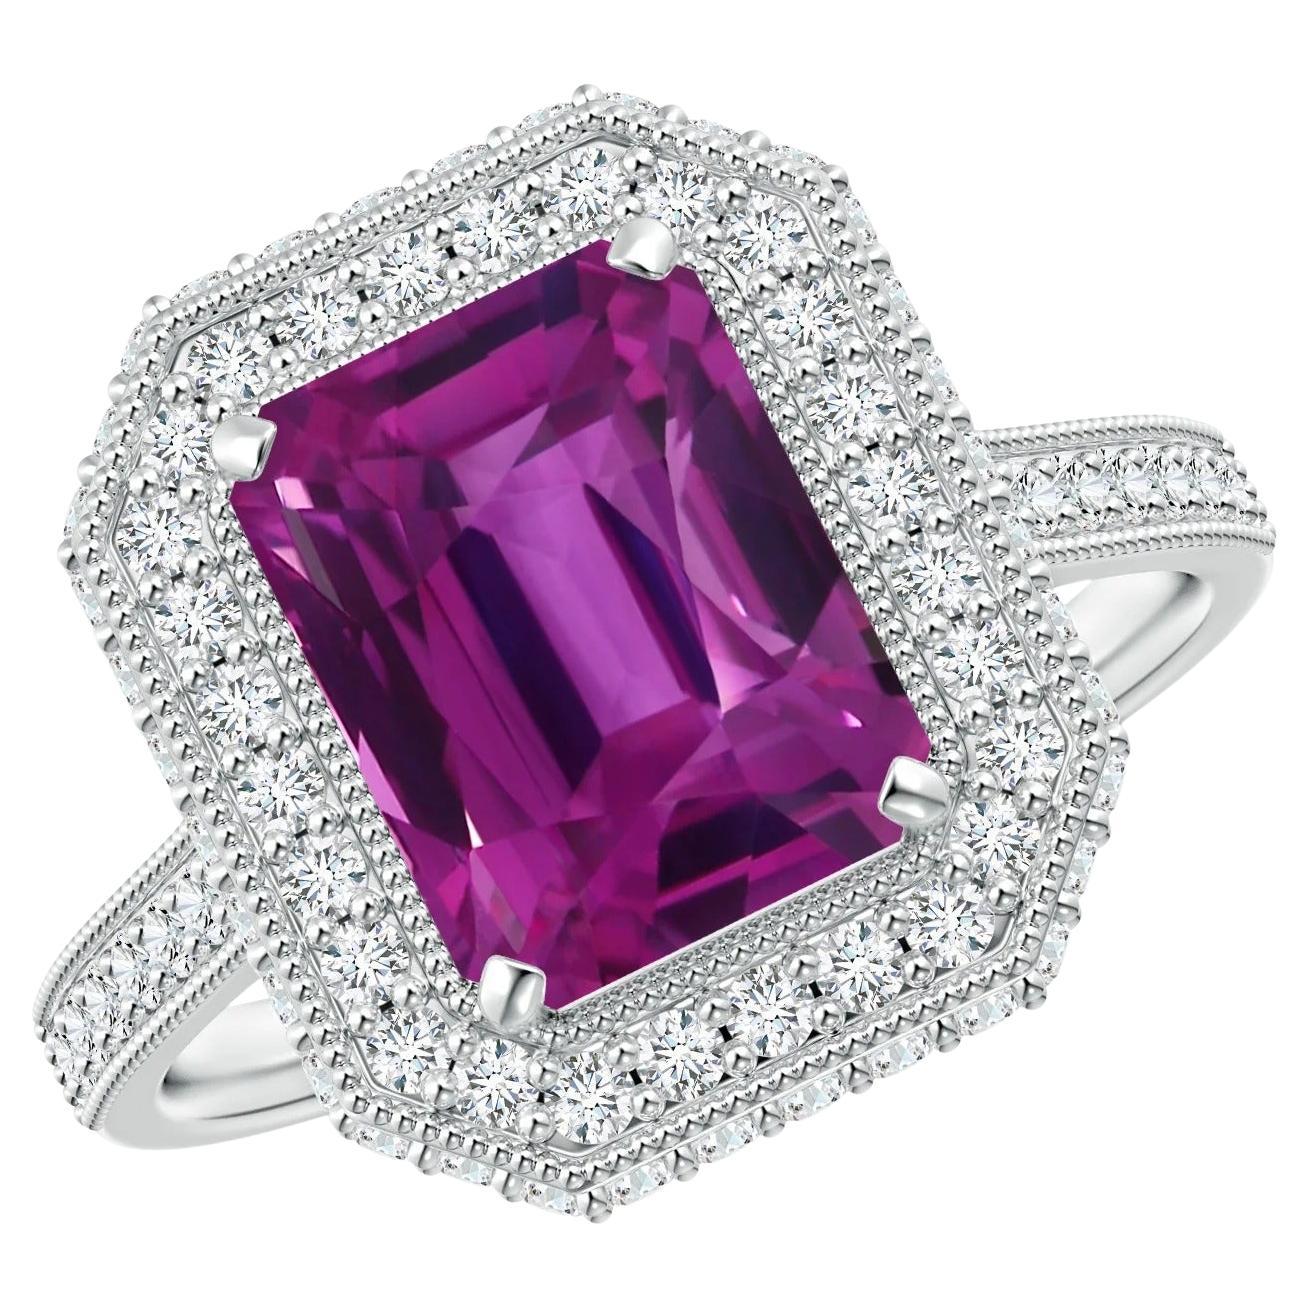 For Sale:  GIA Certified Natural Emerald Cut Pink Sapphire Halo Ring in White Gold